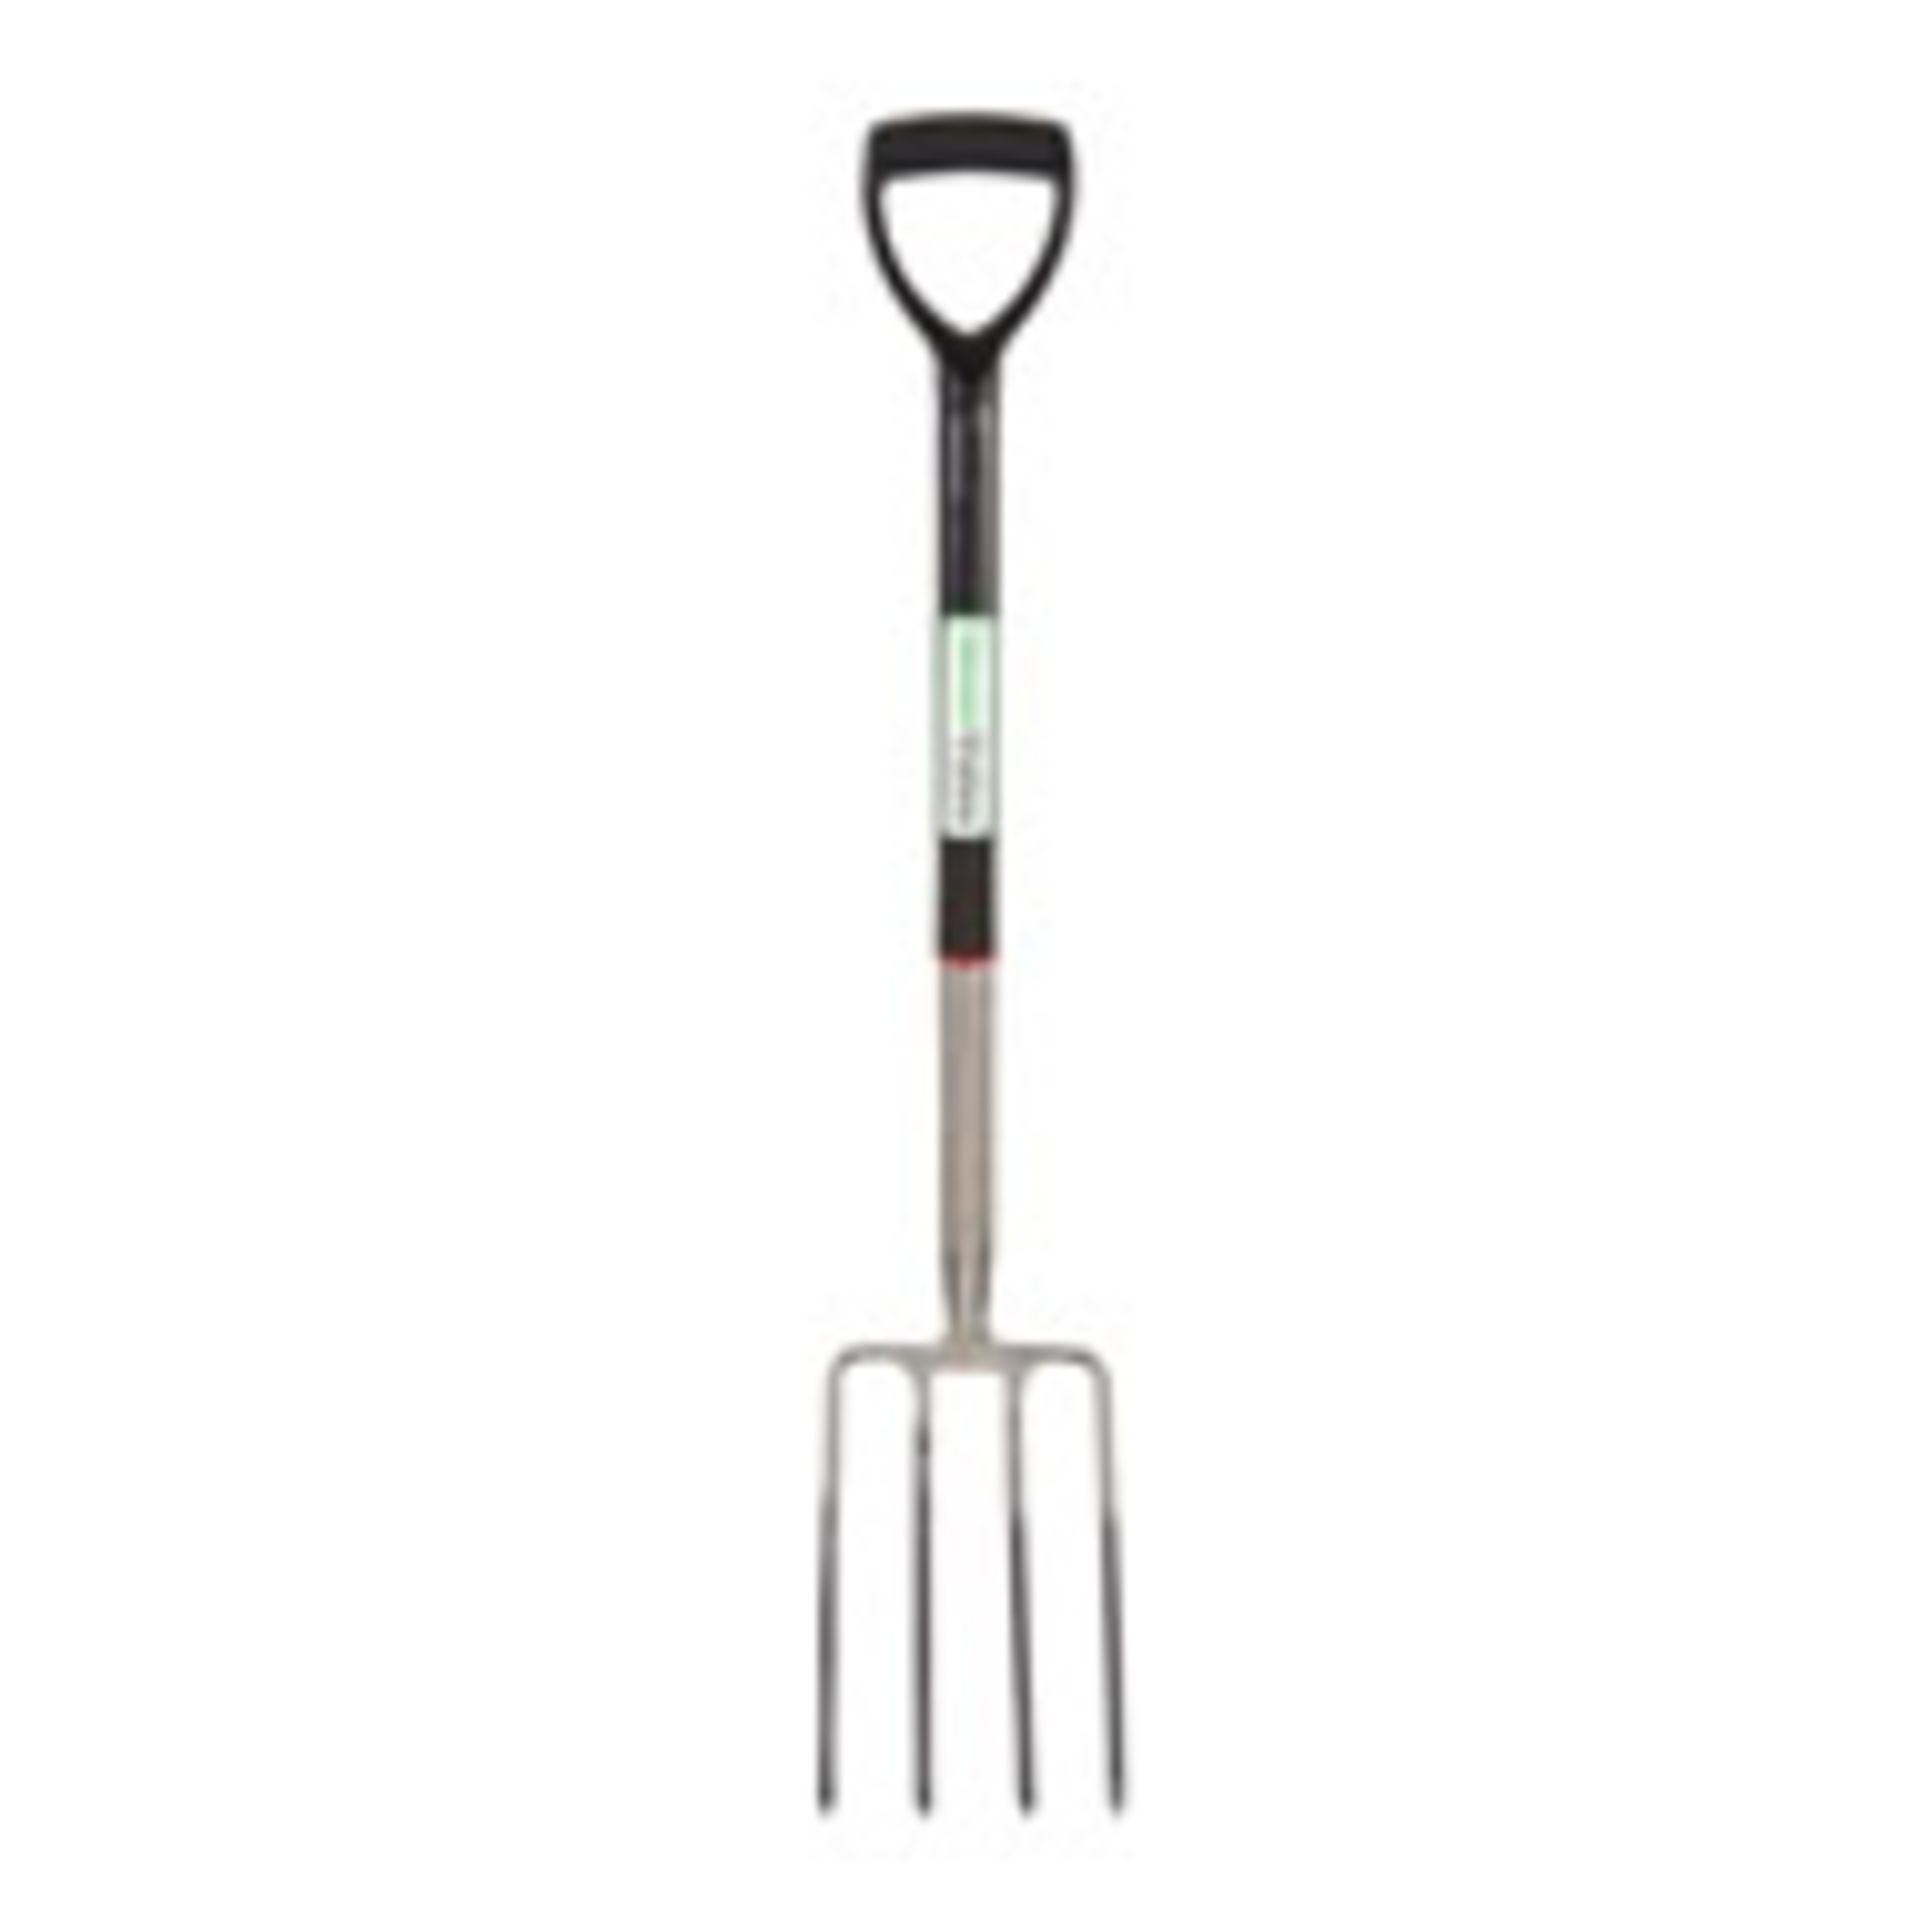 V Brand New Green Valley Stainless Steel Garden Fork With Poly Hilt ISPú39.99 X 2 YOUR BID PRICE